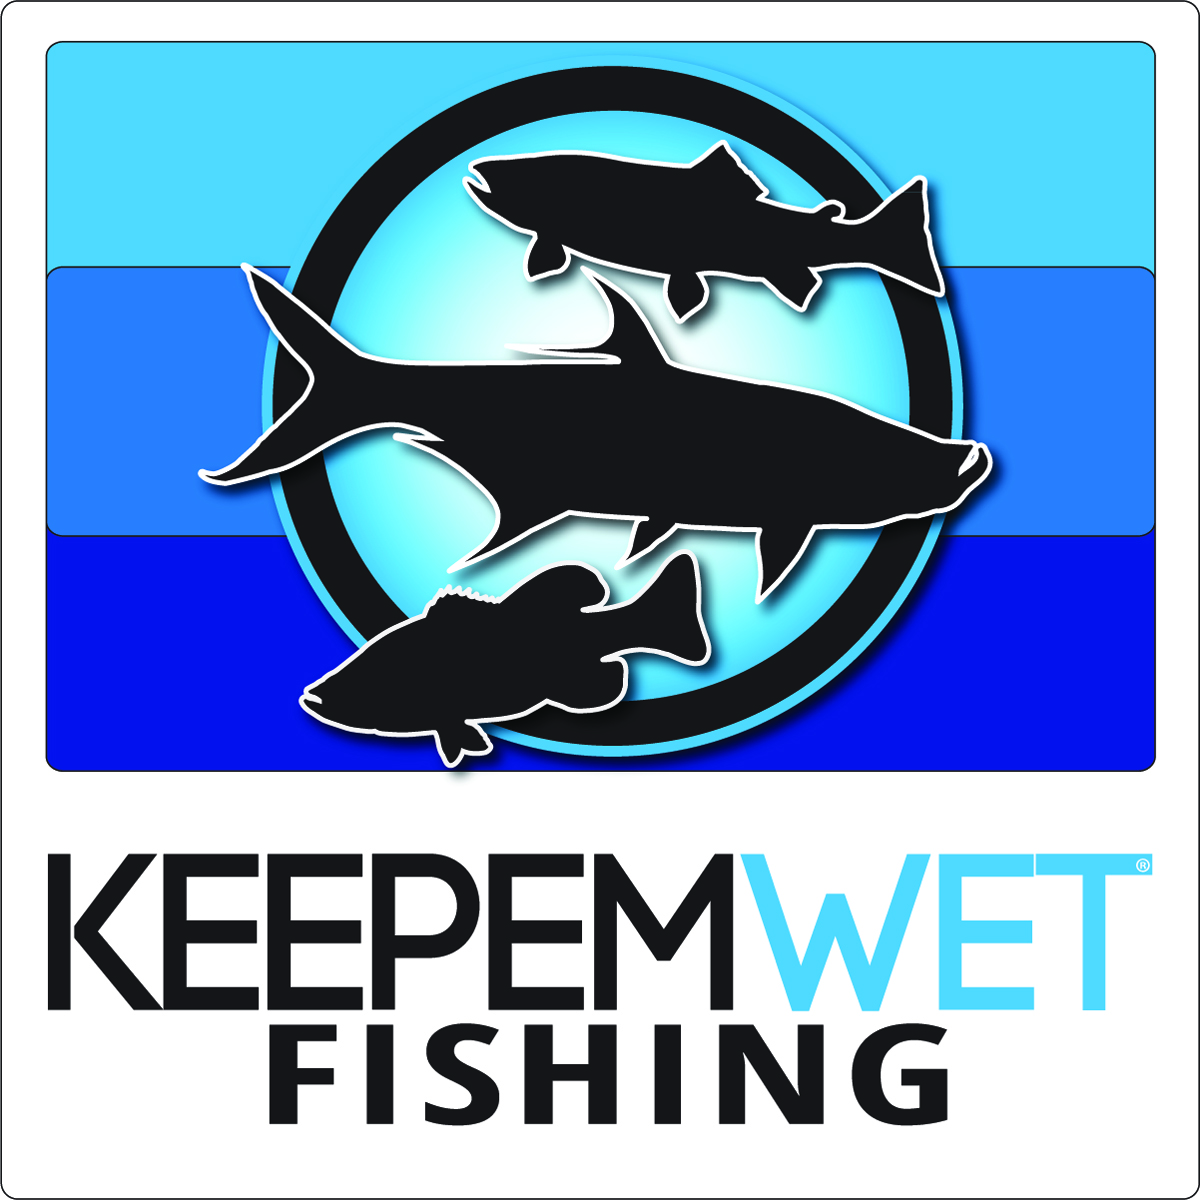 Tail & Keepemwet Fishing Spring Photo Contest 2018